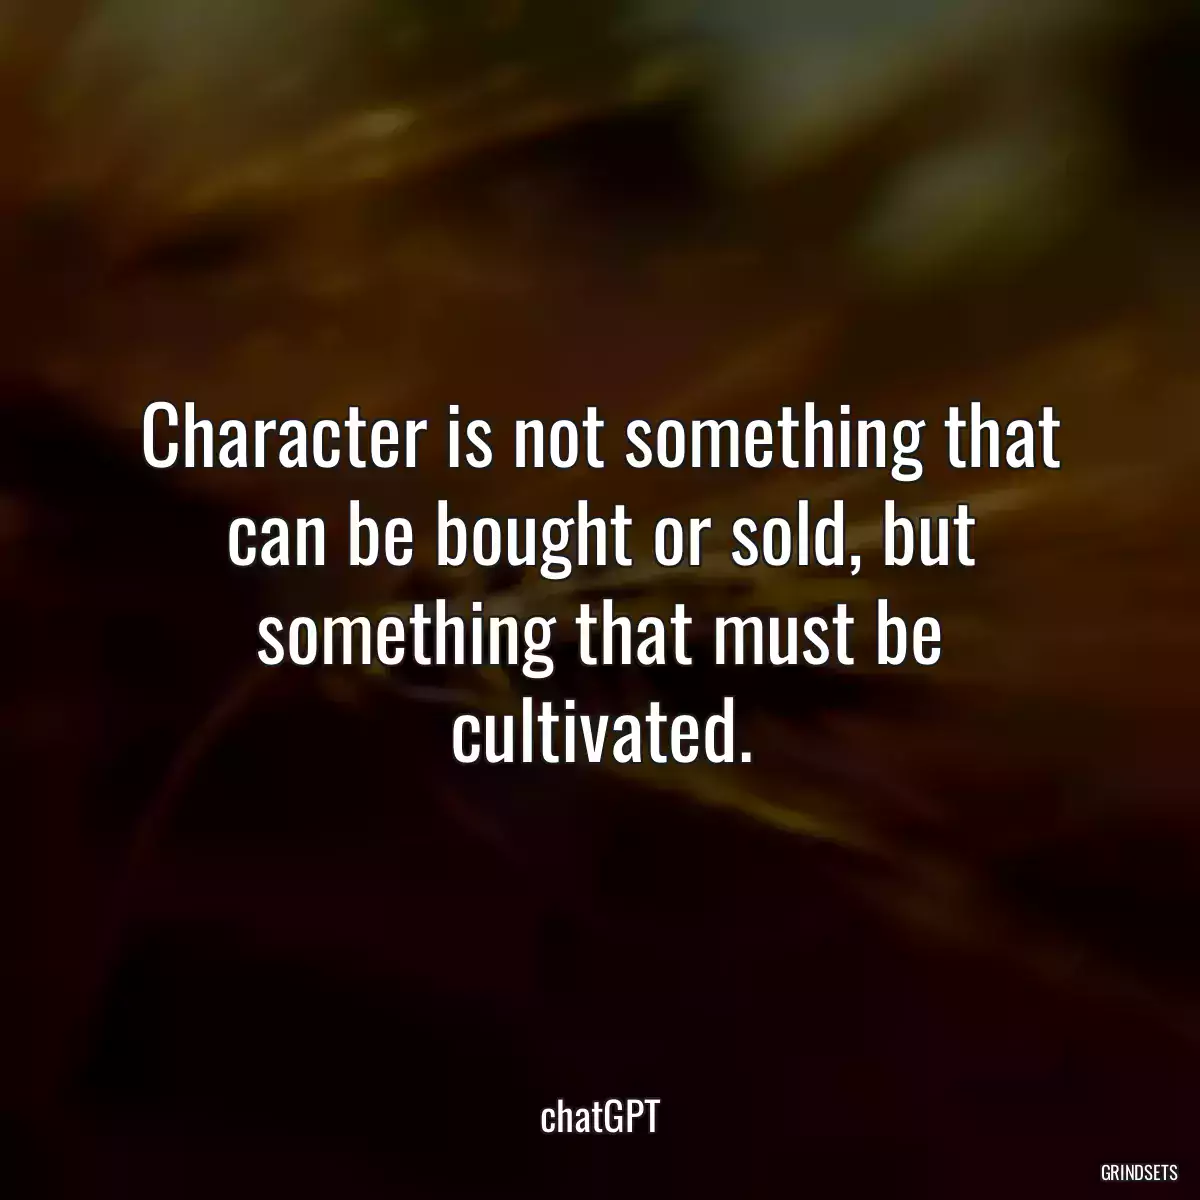 Character is not something that can be bought or sold, but something that must be cultivated.